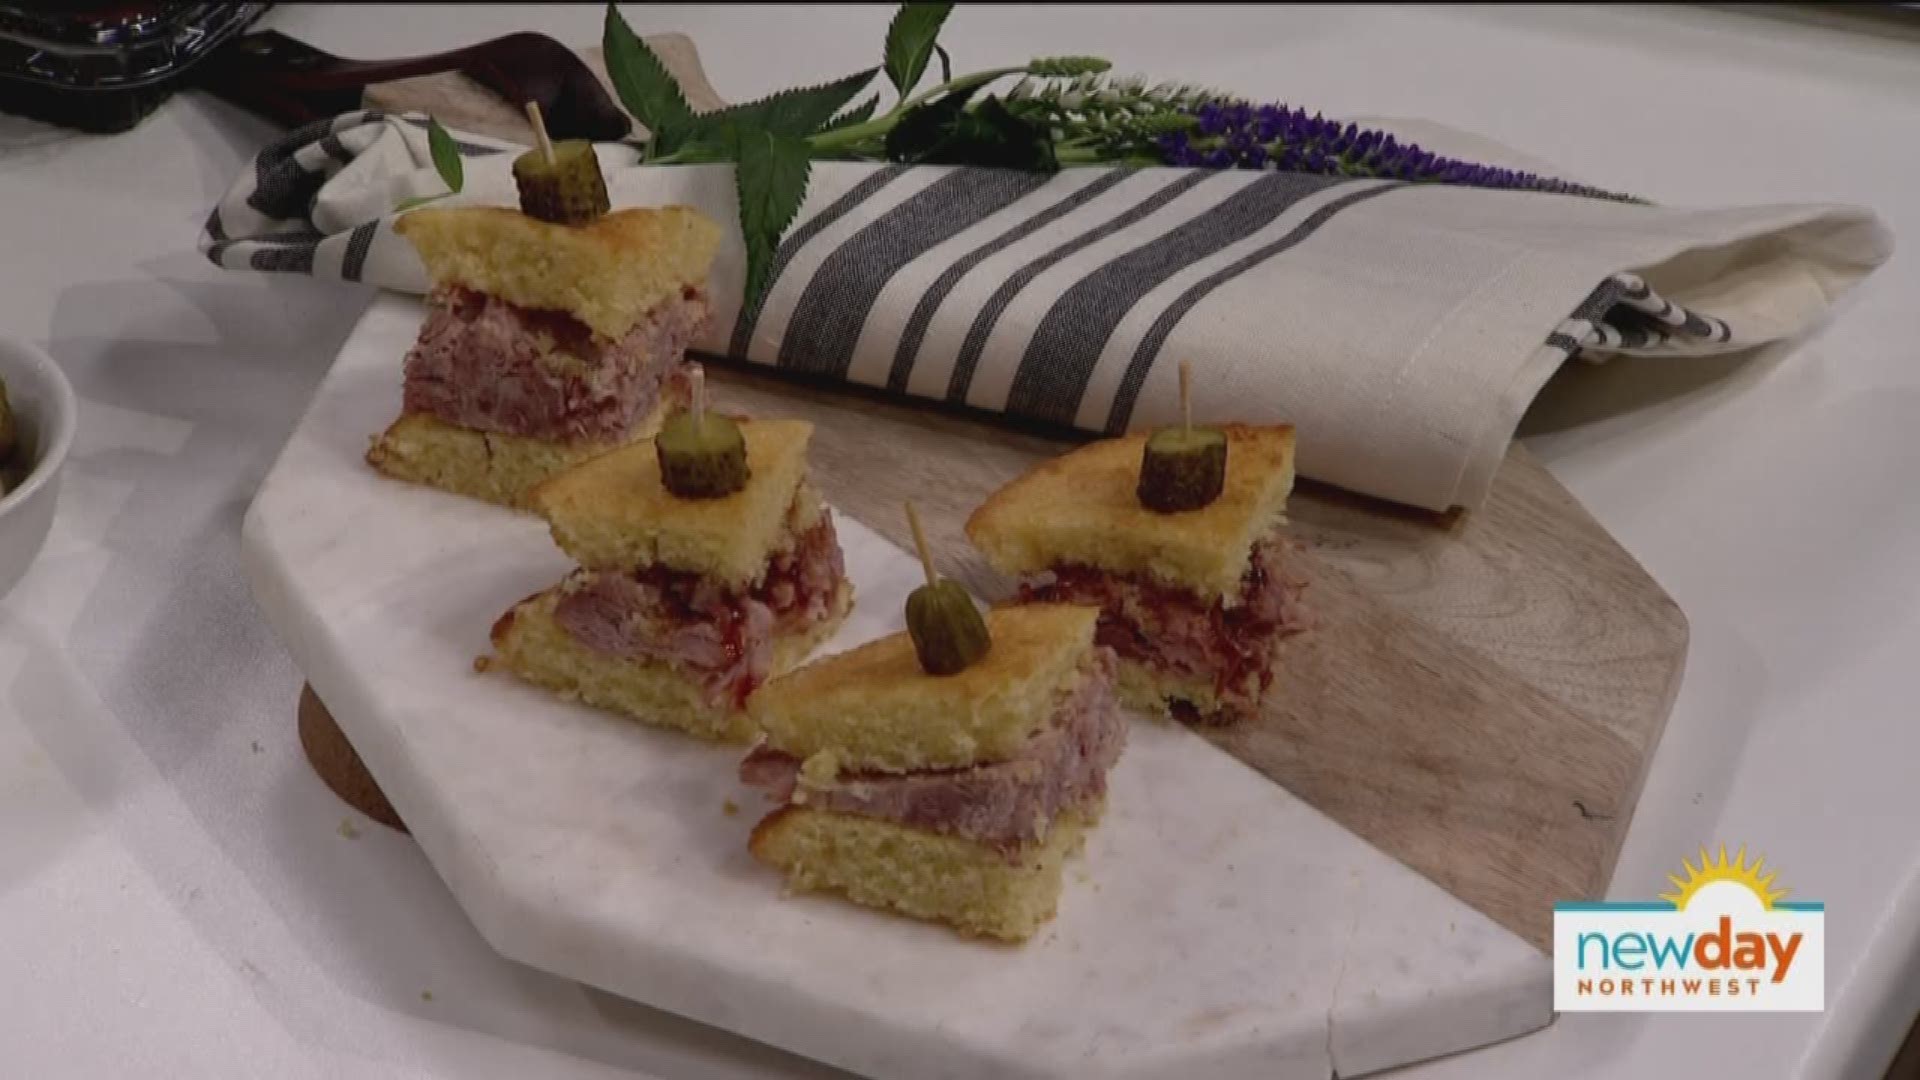 Sheena Kelso from The Invisible Hostess is here to show us how to disguise store-bought items into a gift or party-ready snack to bring along after a quick stop at the supermarket.